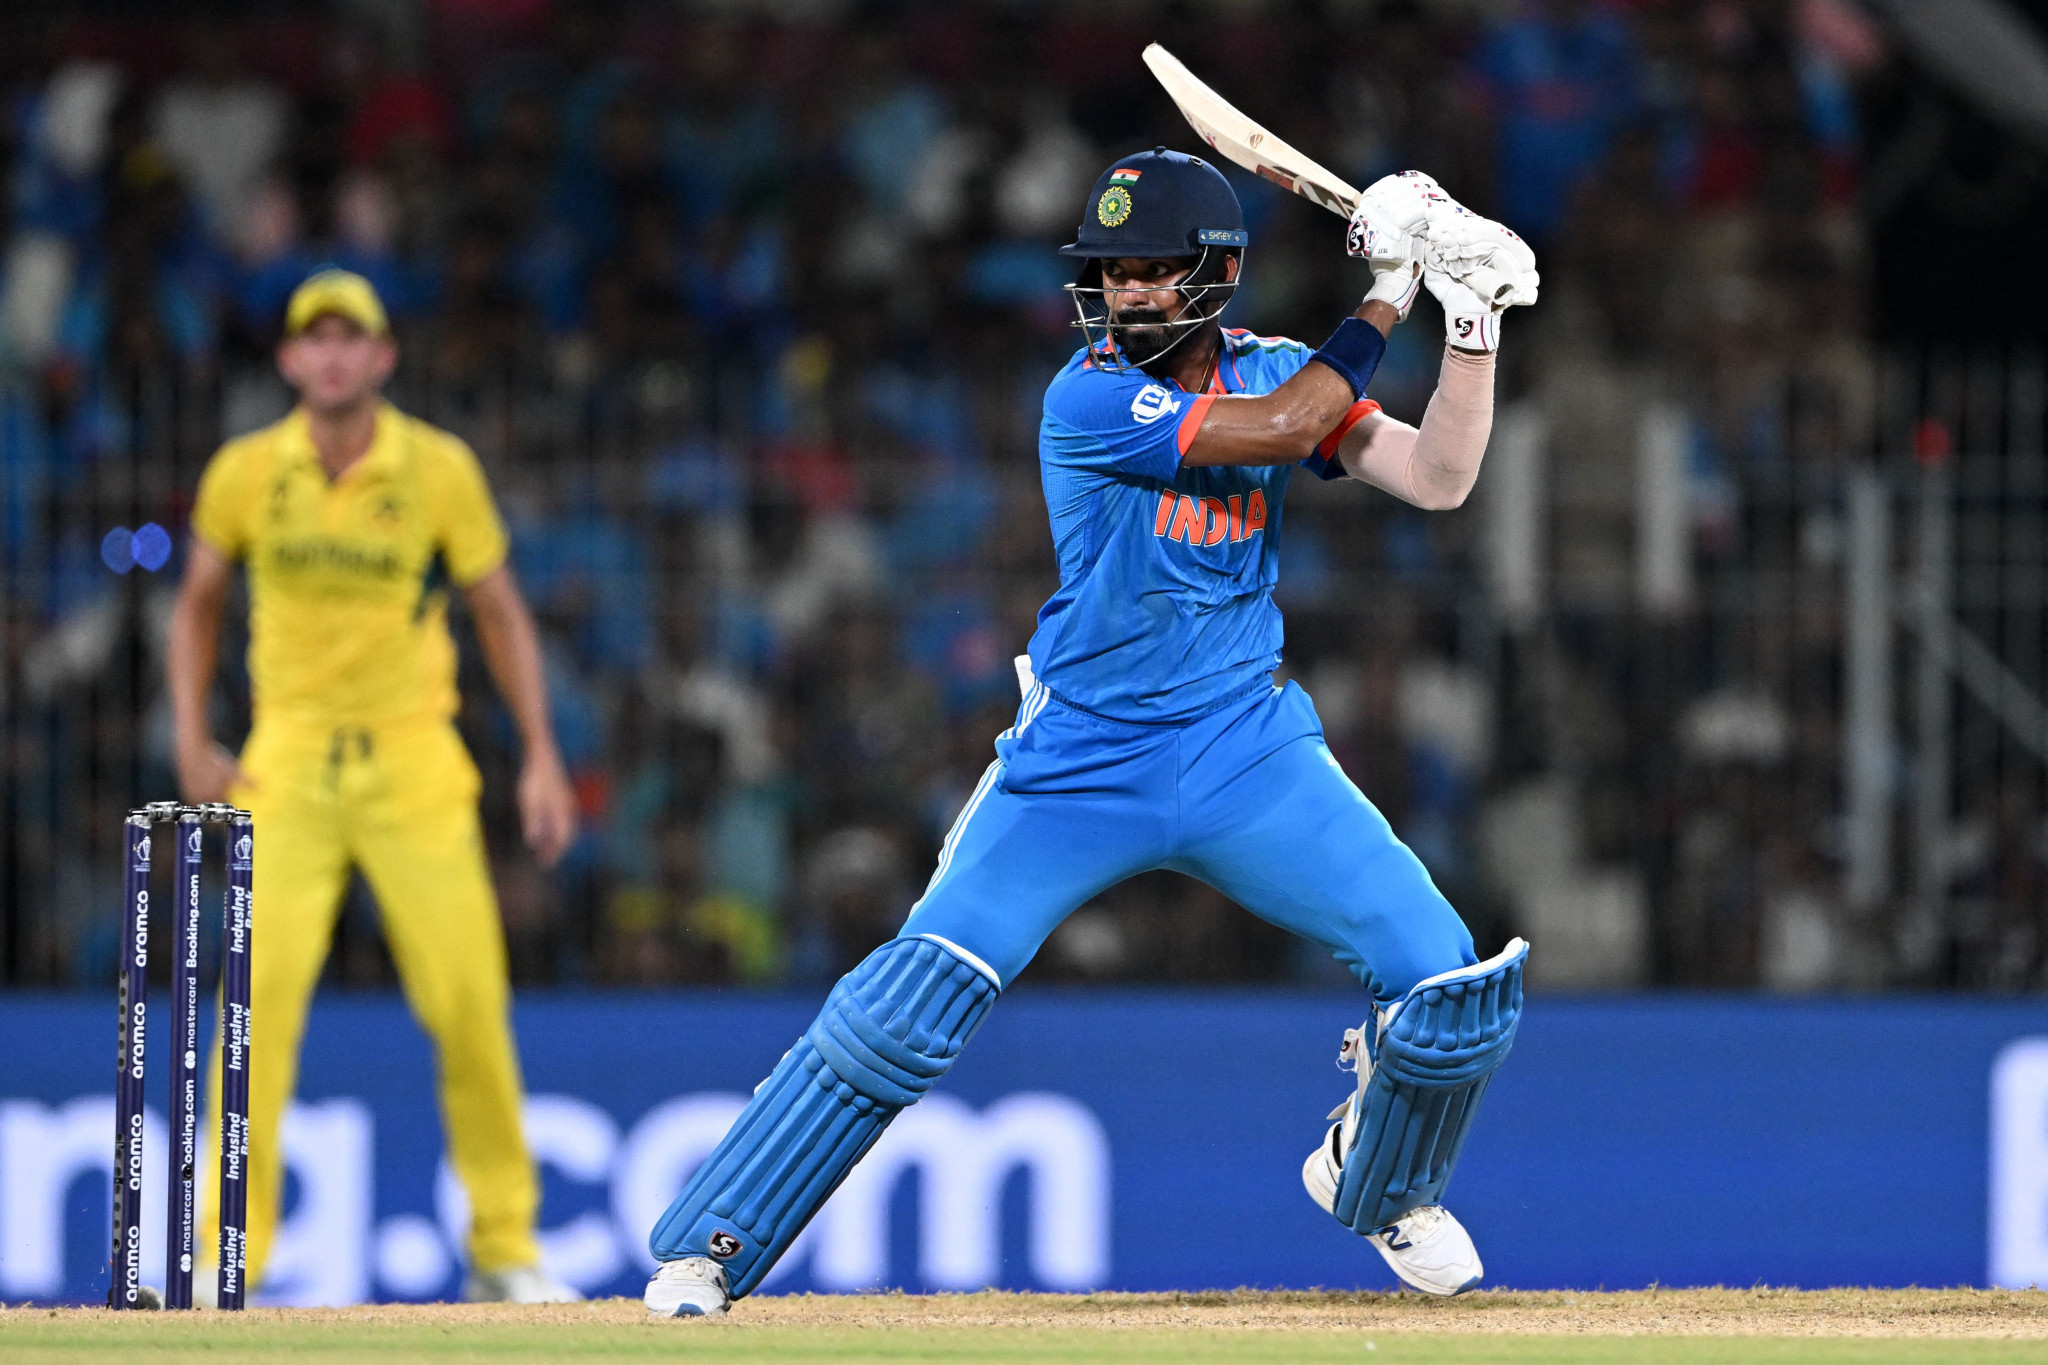 KL Rahul helped India get their Cricket World Cup campaign off to a winning start against Australia in Chennai ©Getty Images